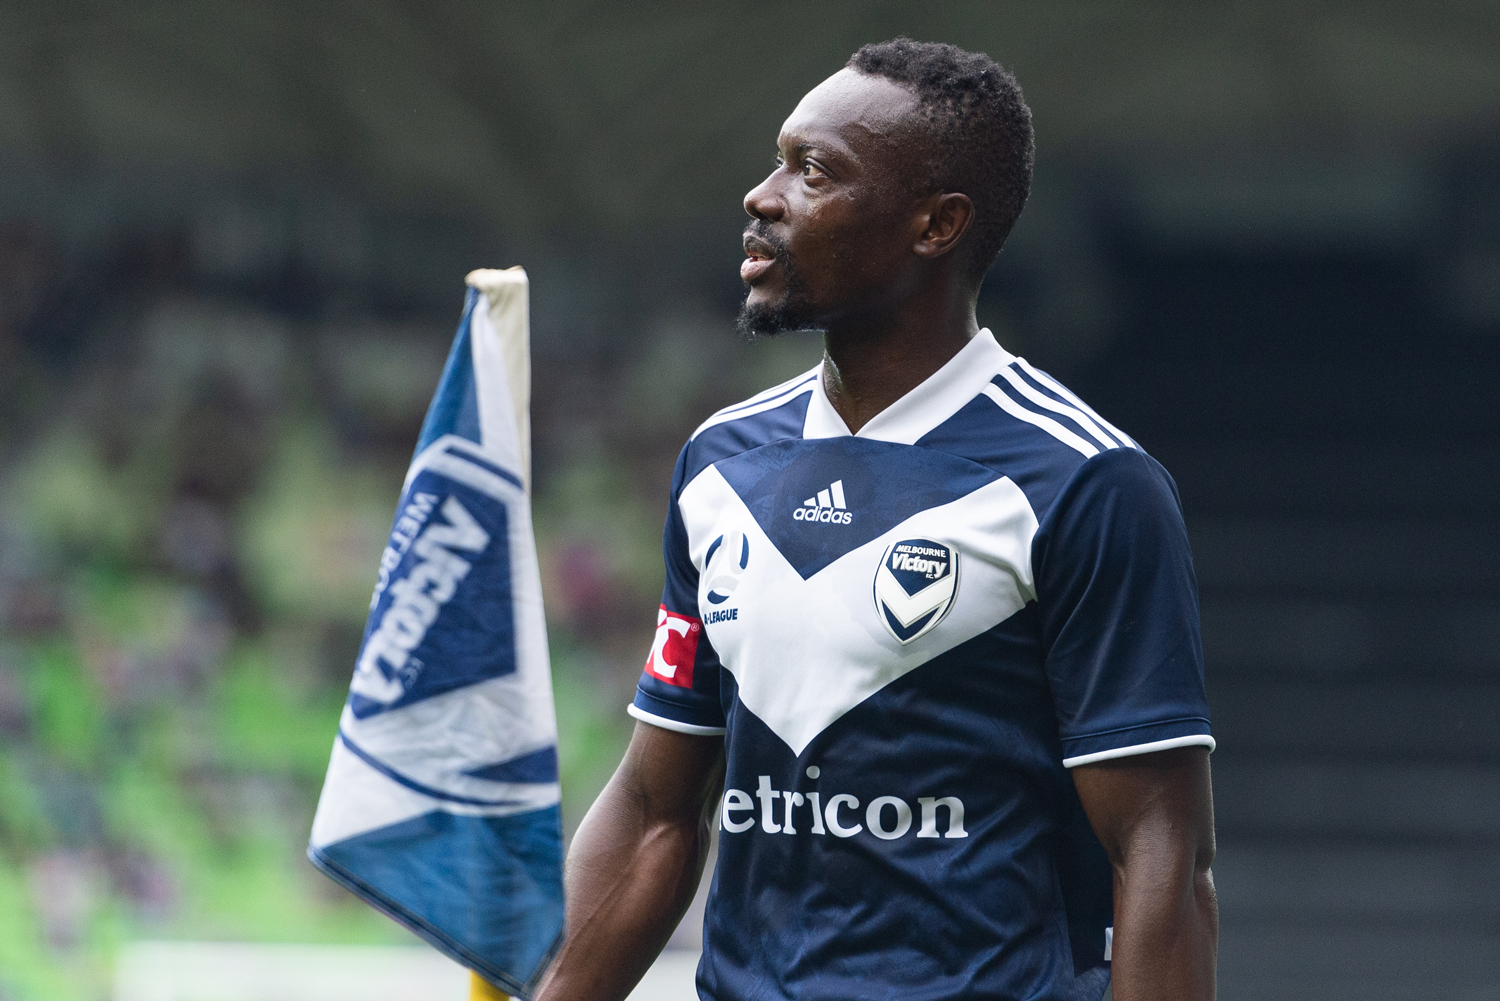 Melbourne victory